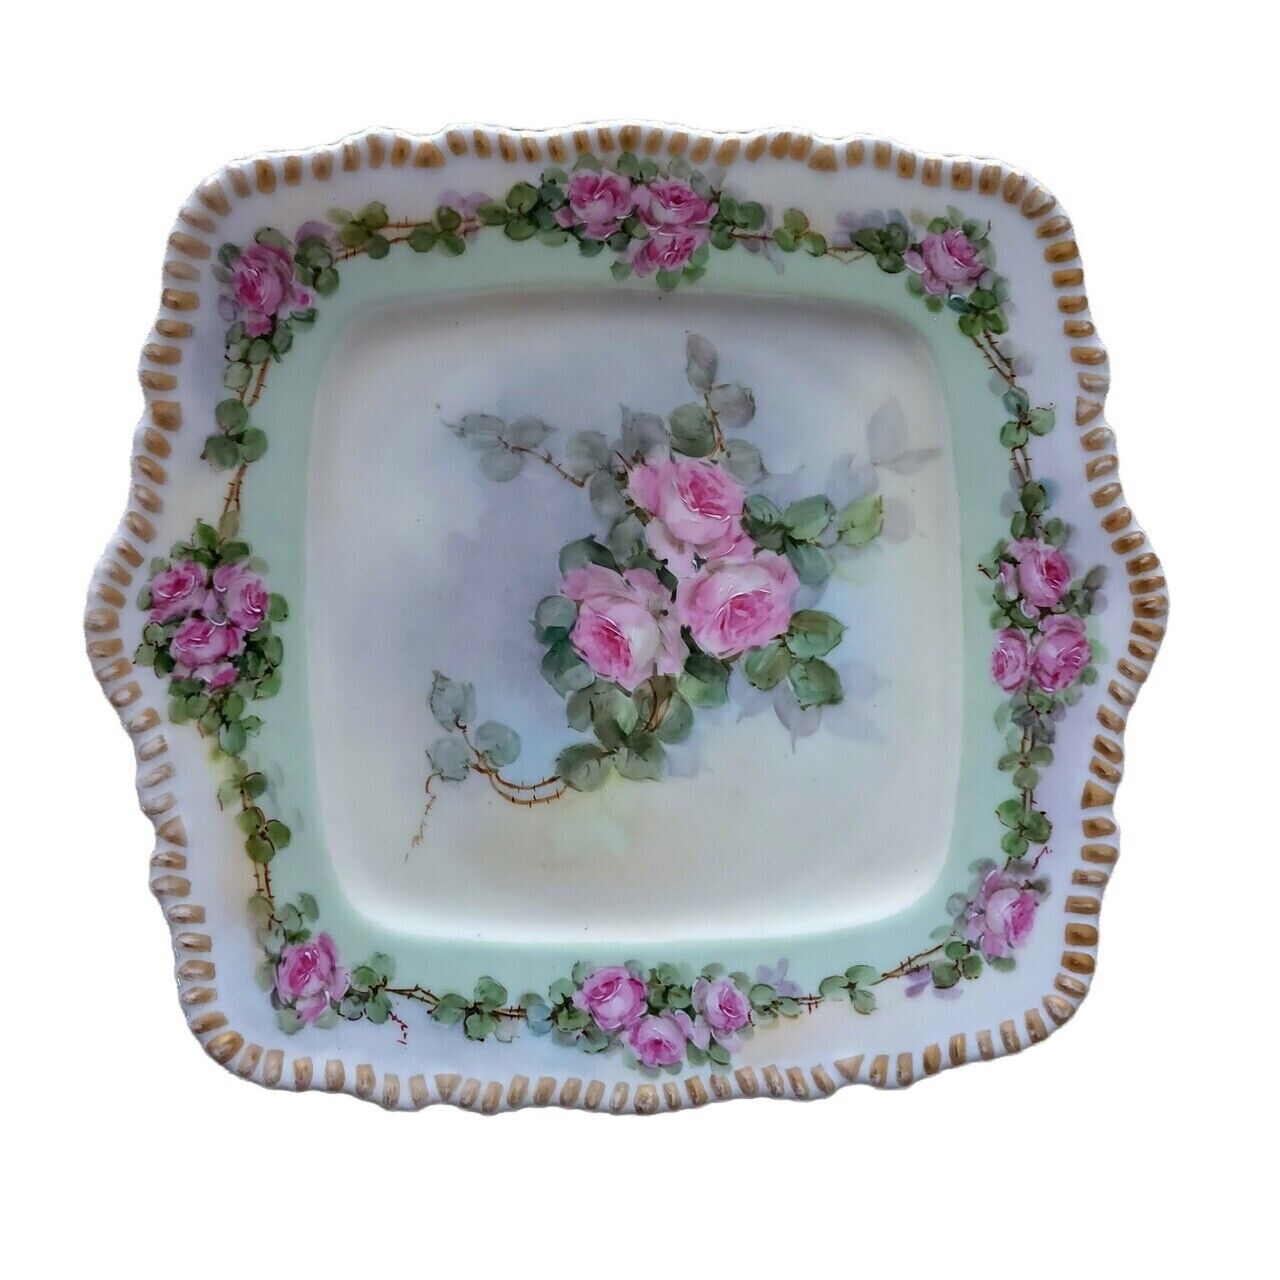 Delinieres & Co. Limoges France 1900 Hand Painted Wild Pink Roses Floral Handle